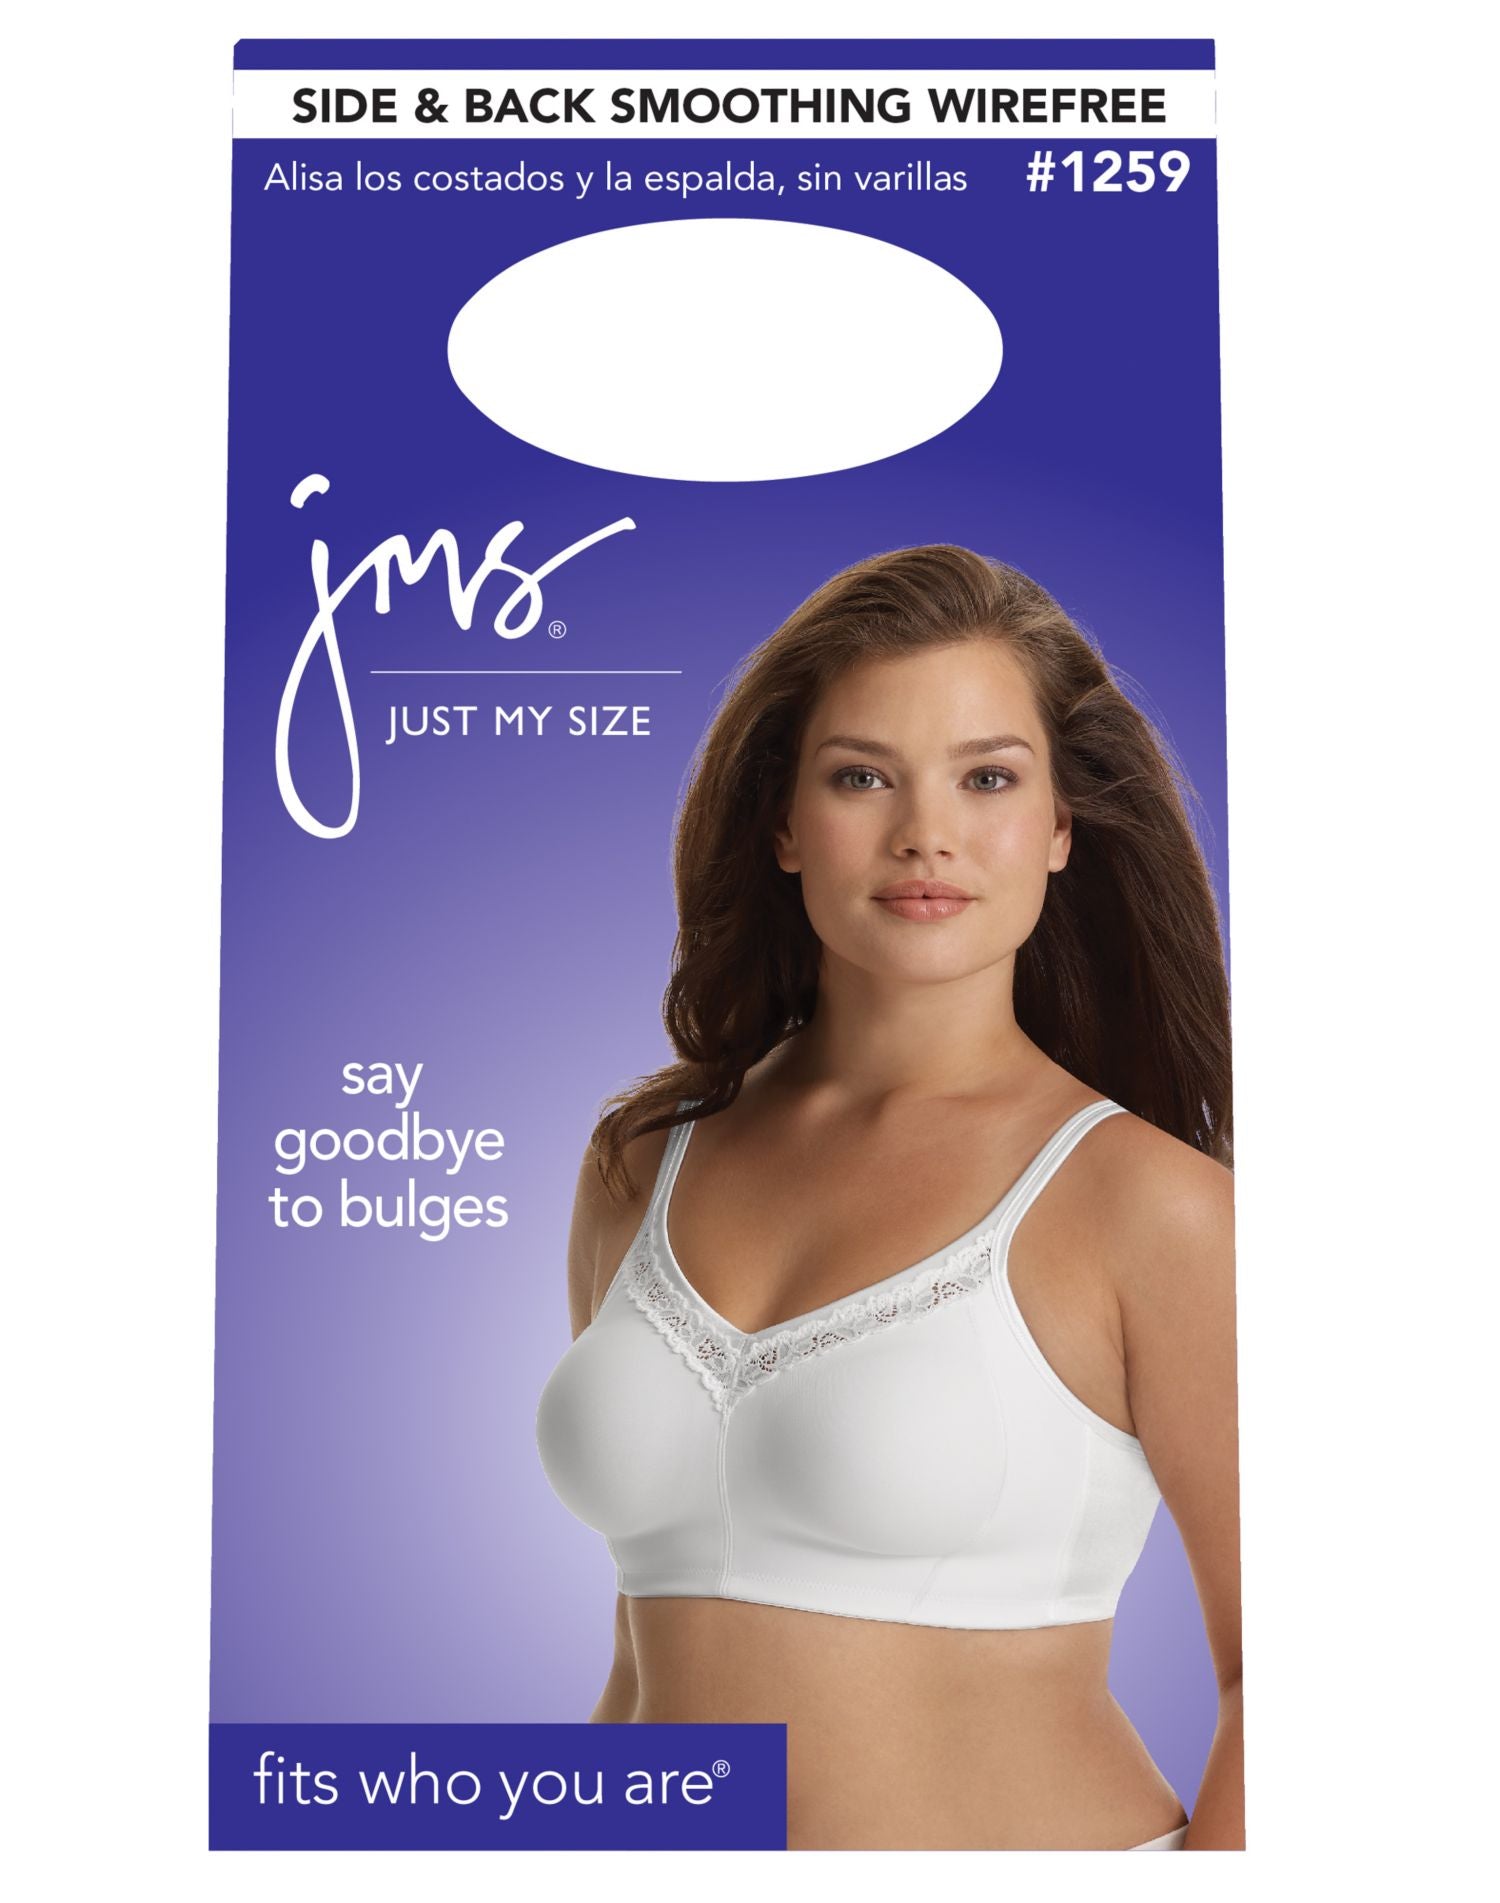 Just My Size Women's Side & Back Smoothing Wire Free Bra MJ1259